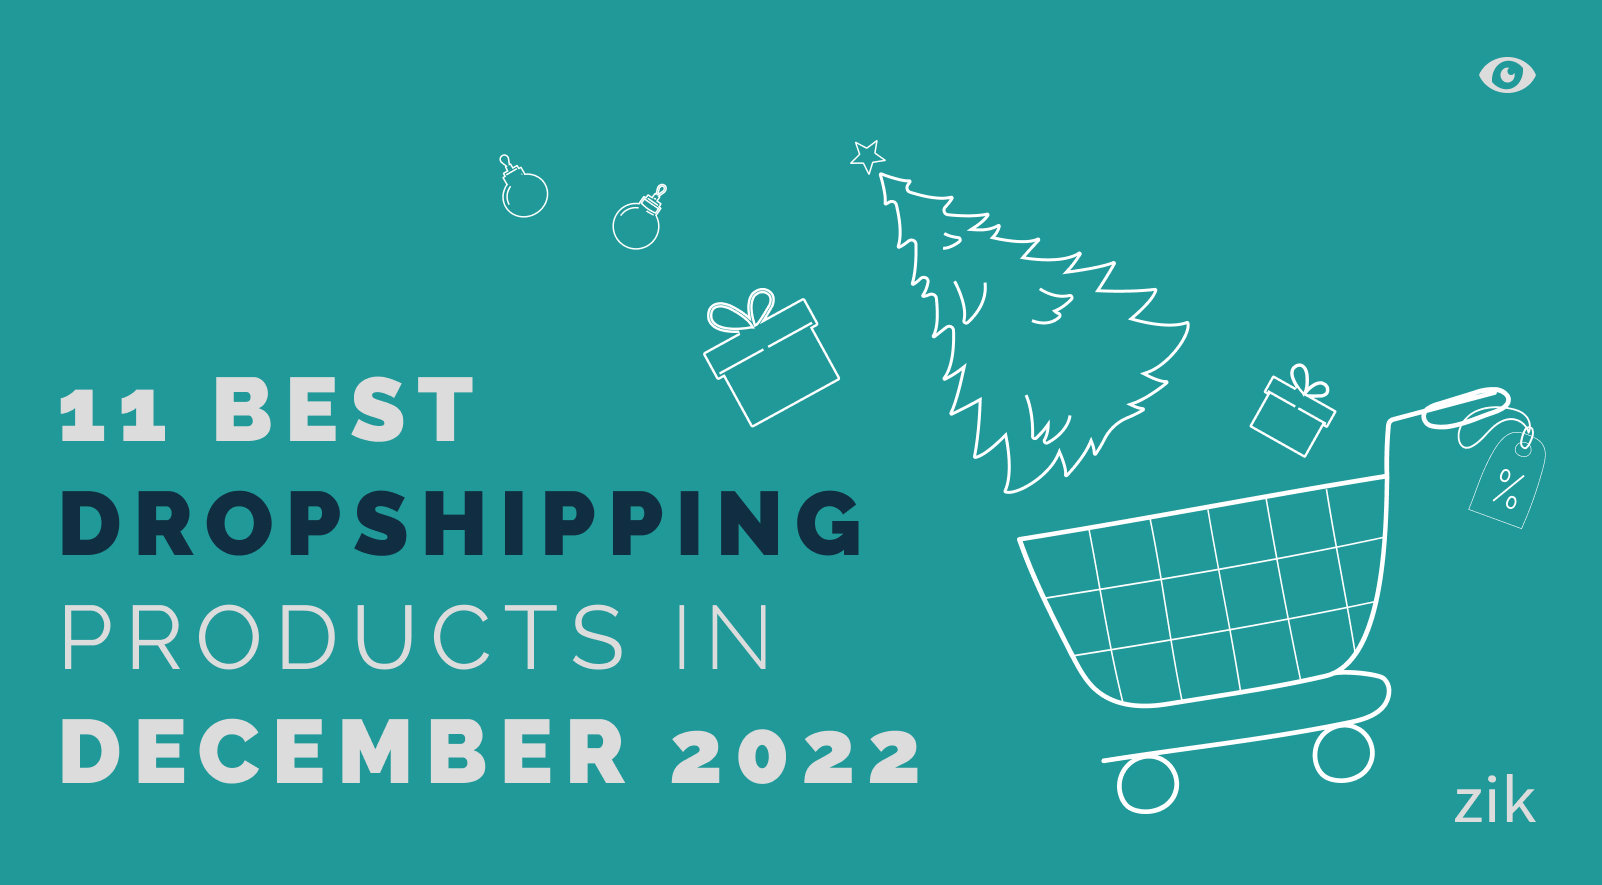 Top Trending Products: Fall 2022